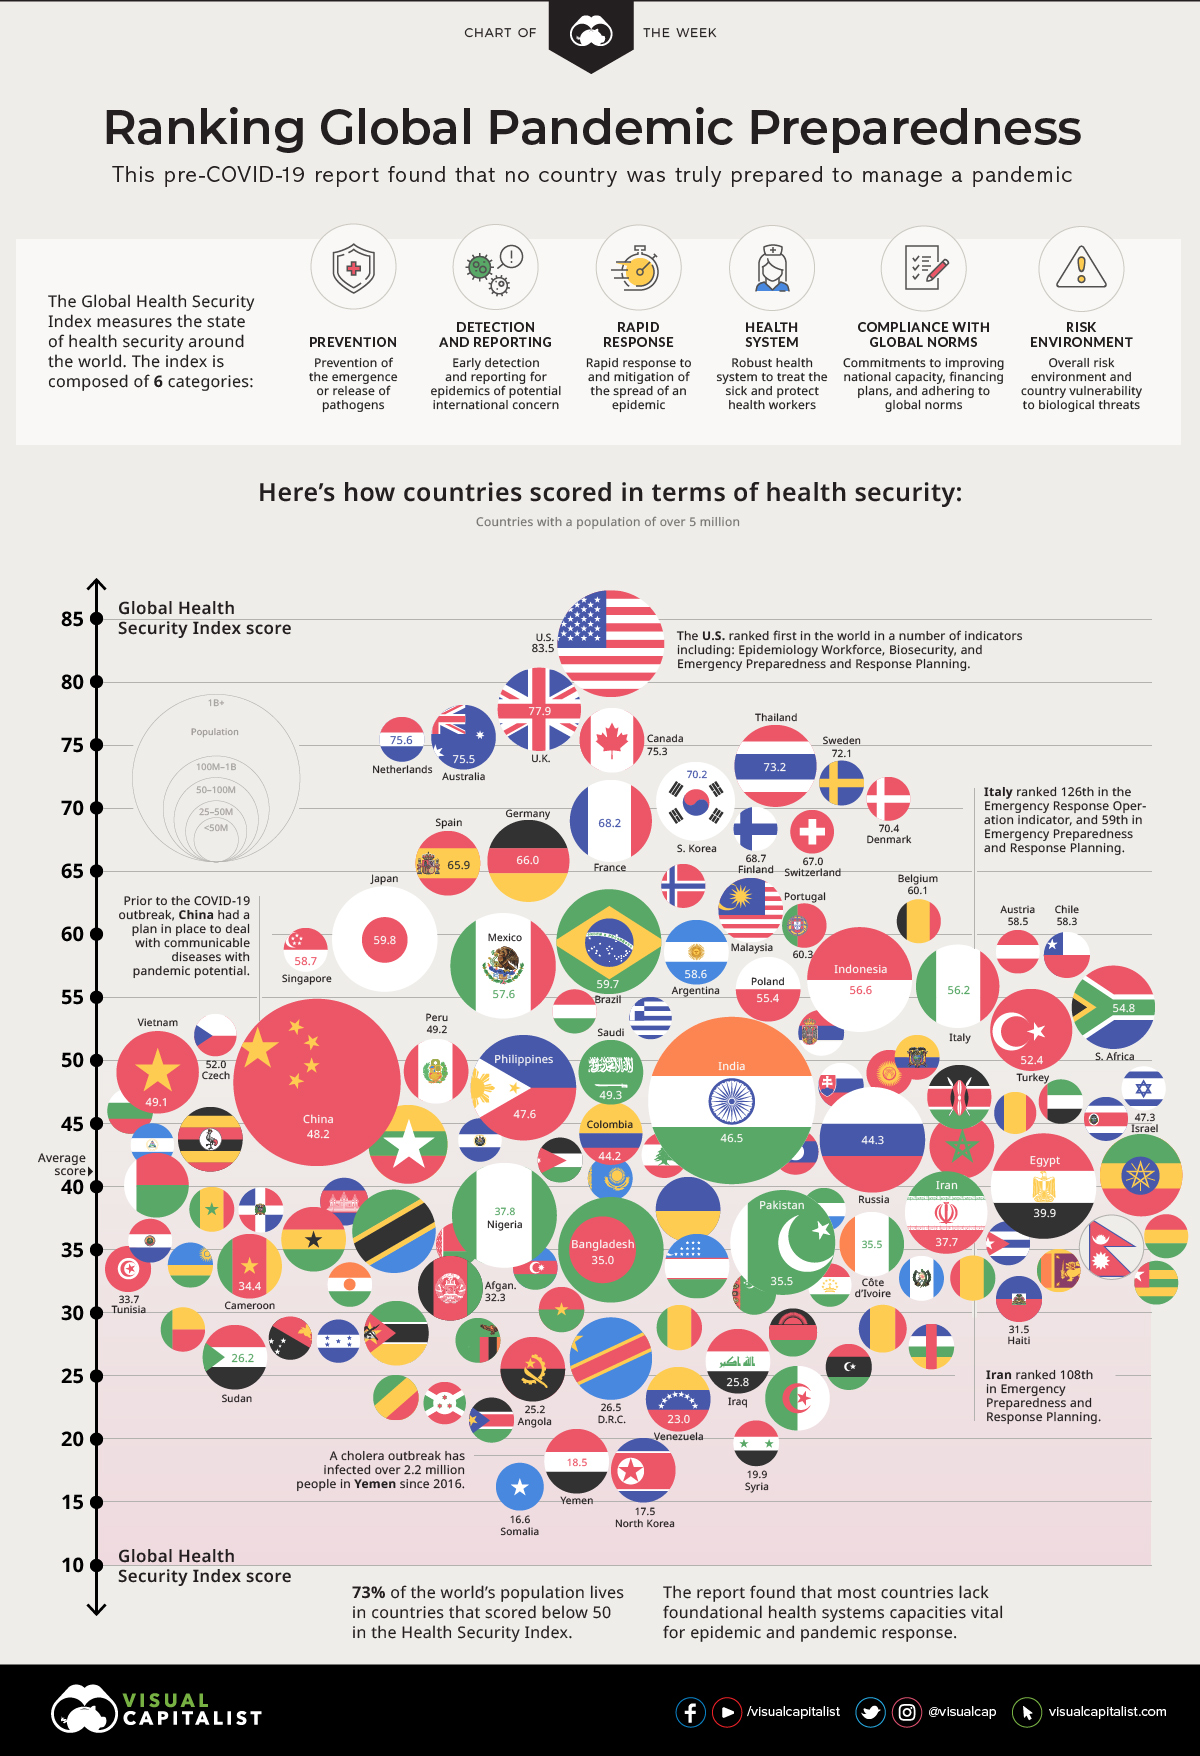 Ranked: Global Pandemic Preparedness by Country